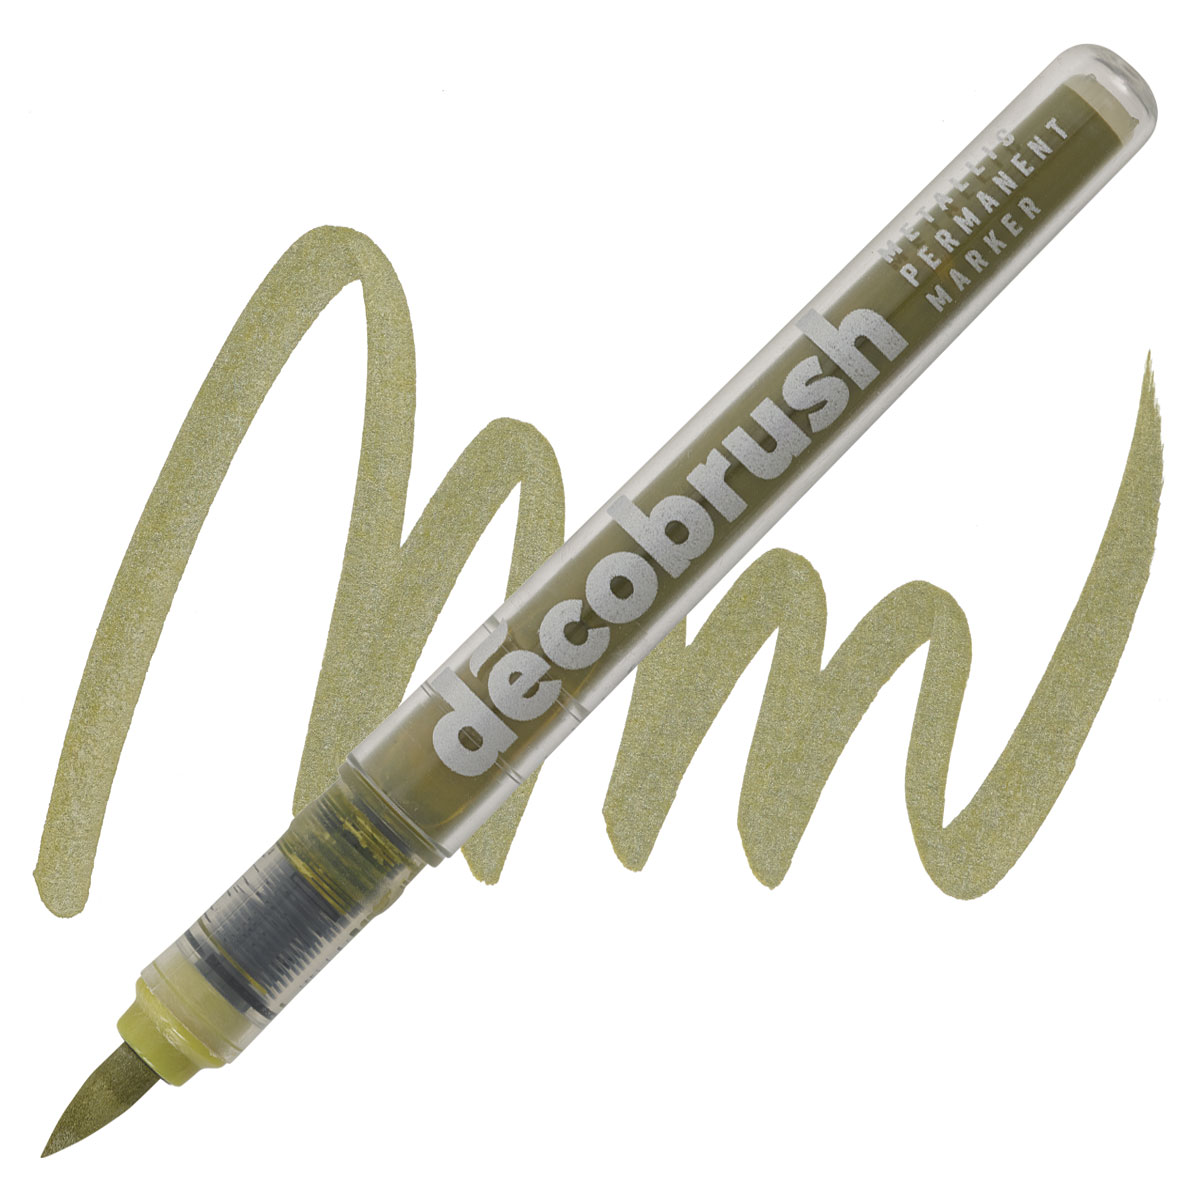 Karin Decobrush Markers: Are they worth it? Swatches, Lettering